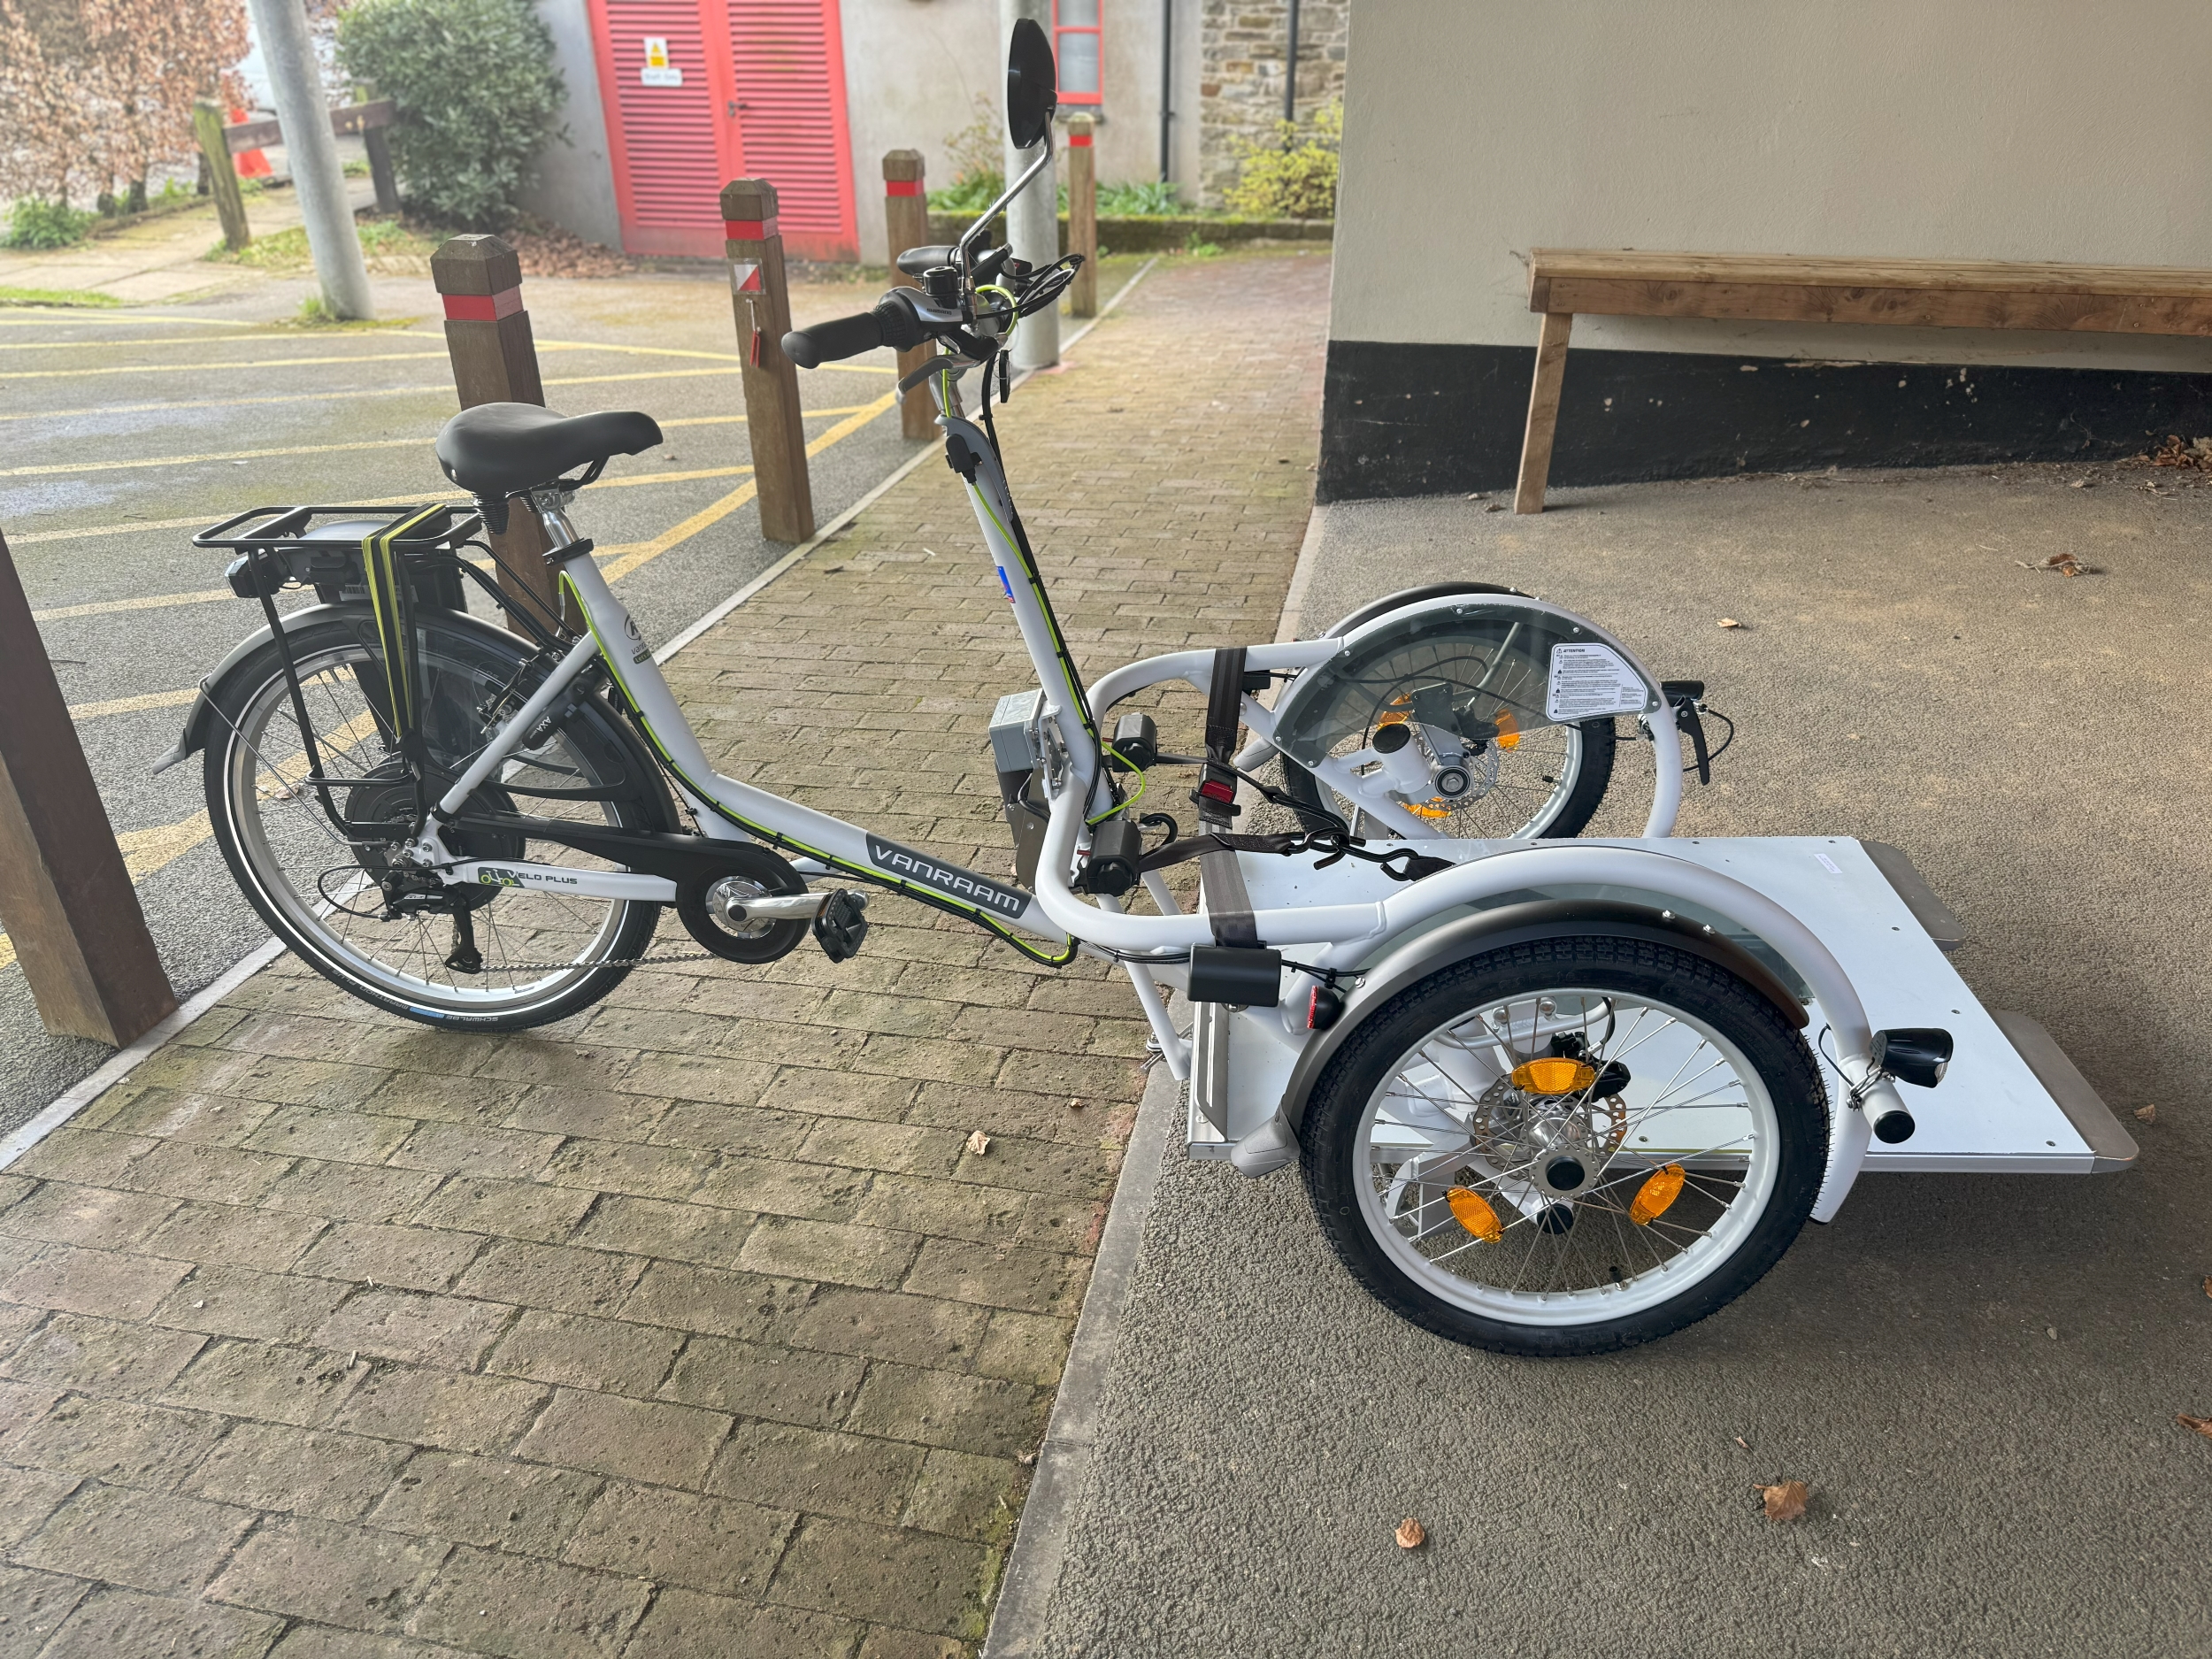 A white tricycle is stationary on a paved area. The front two wheels are either side of a white platform big enough for a wheelchair. The back wheel, the saddle and peddles are like an ordinary bicycle.